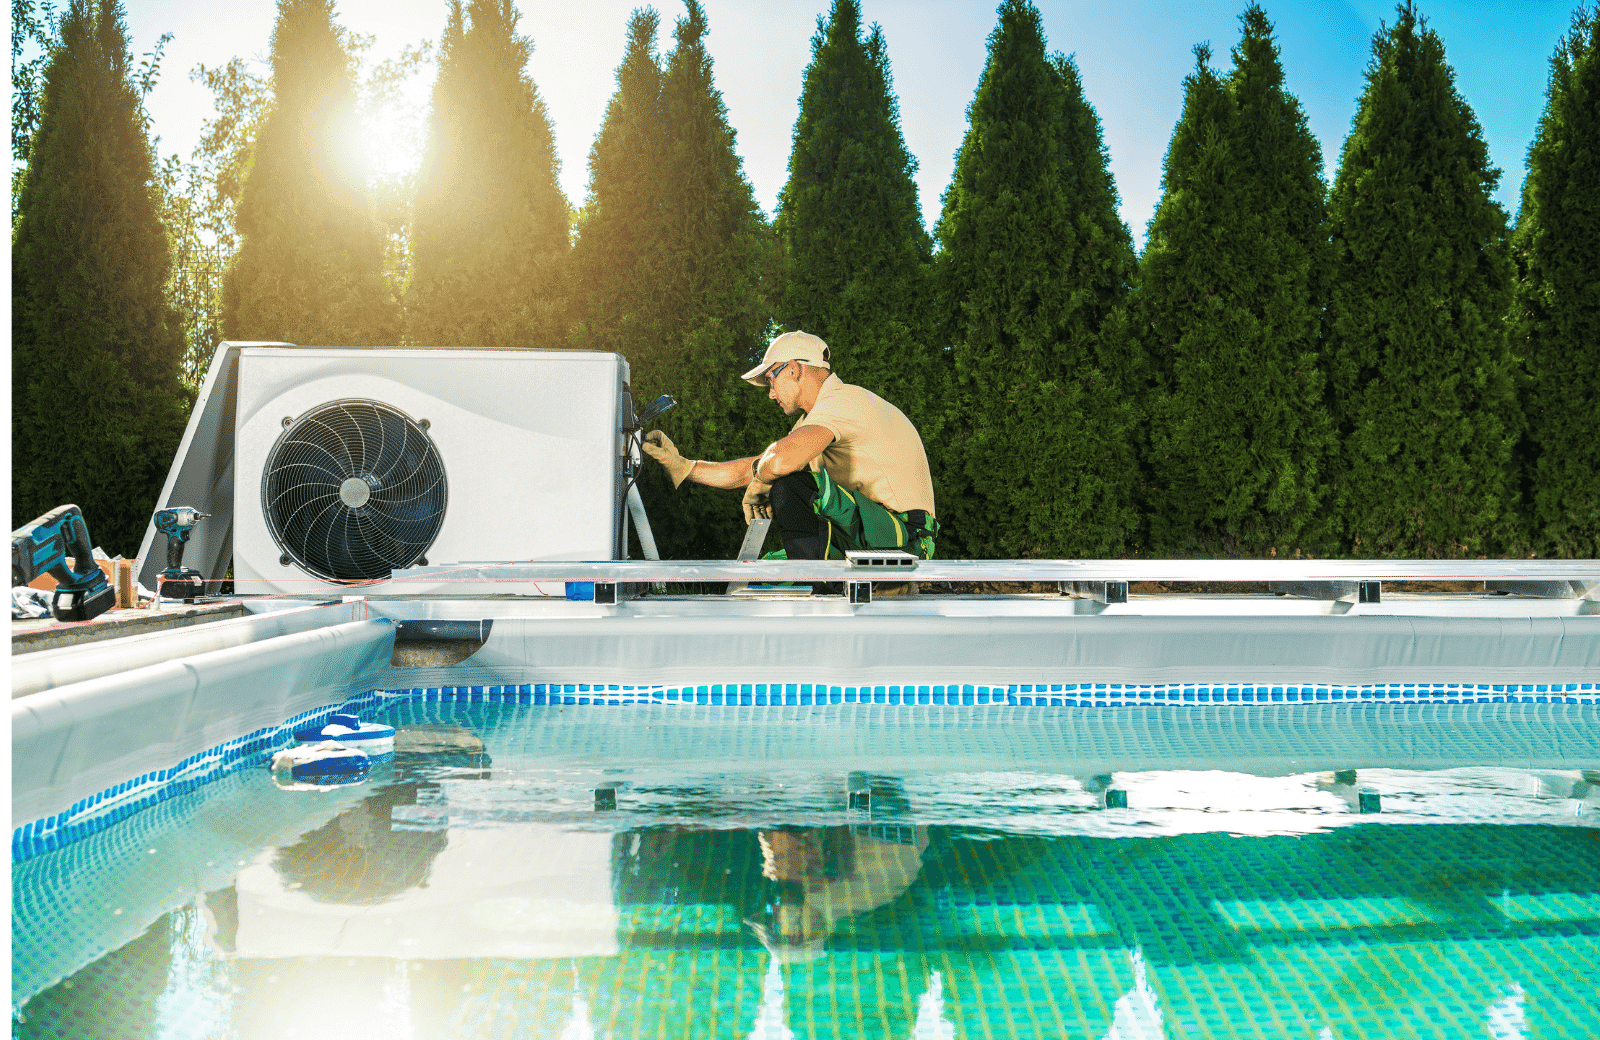 Solar Pool Heaters Are the Low-Cost Way to Heat Your Pool